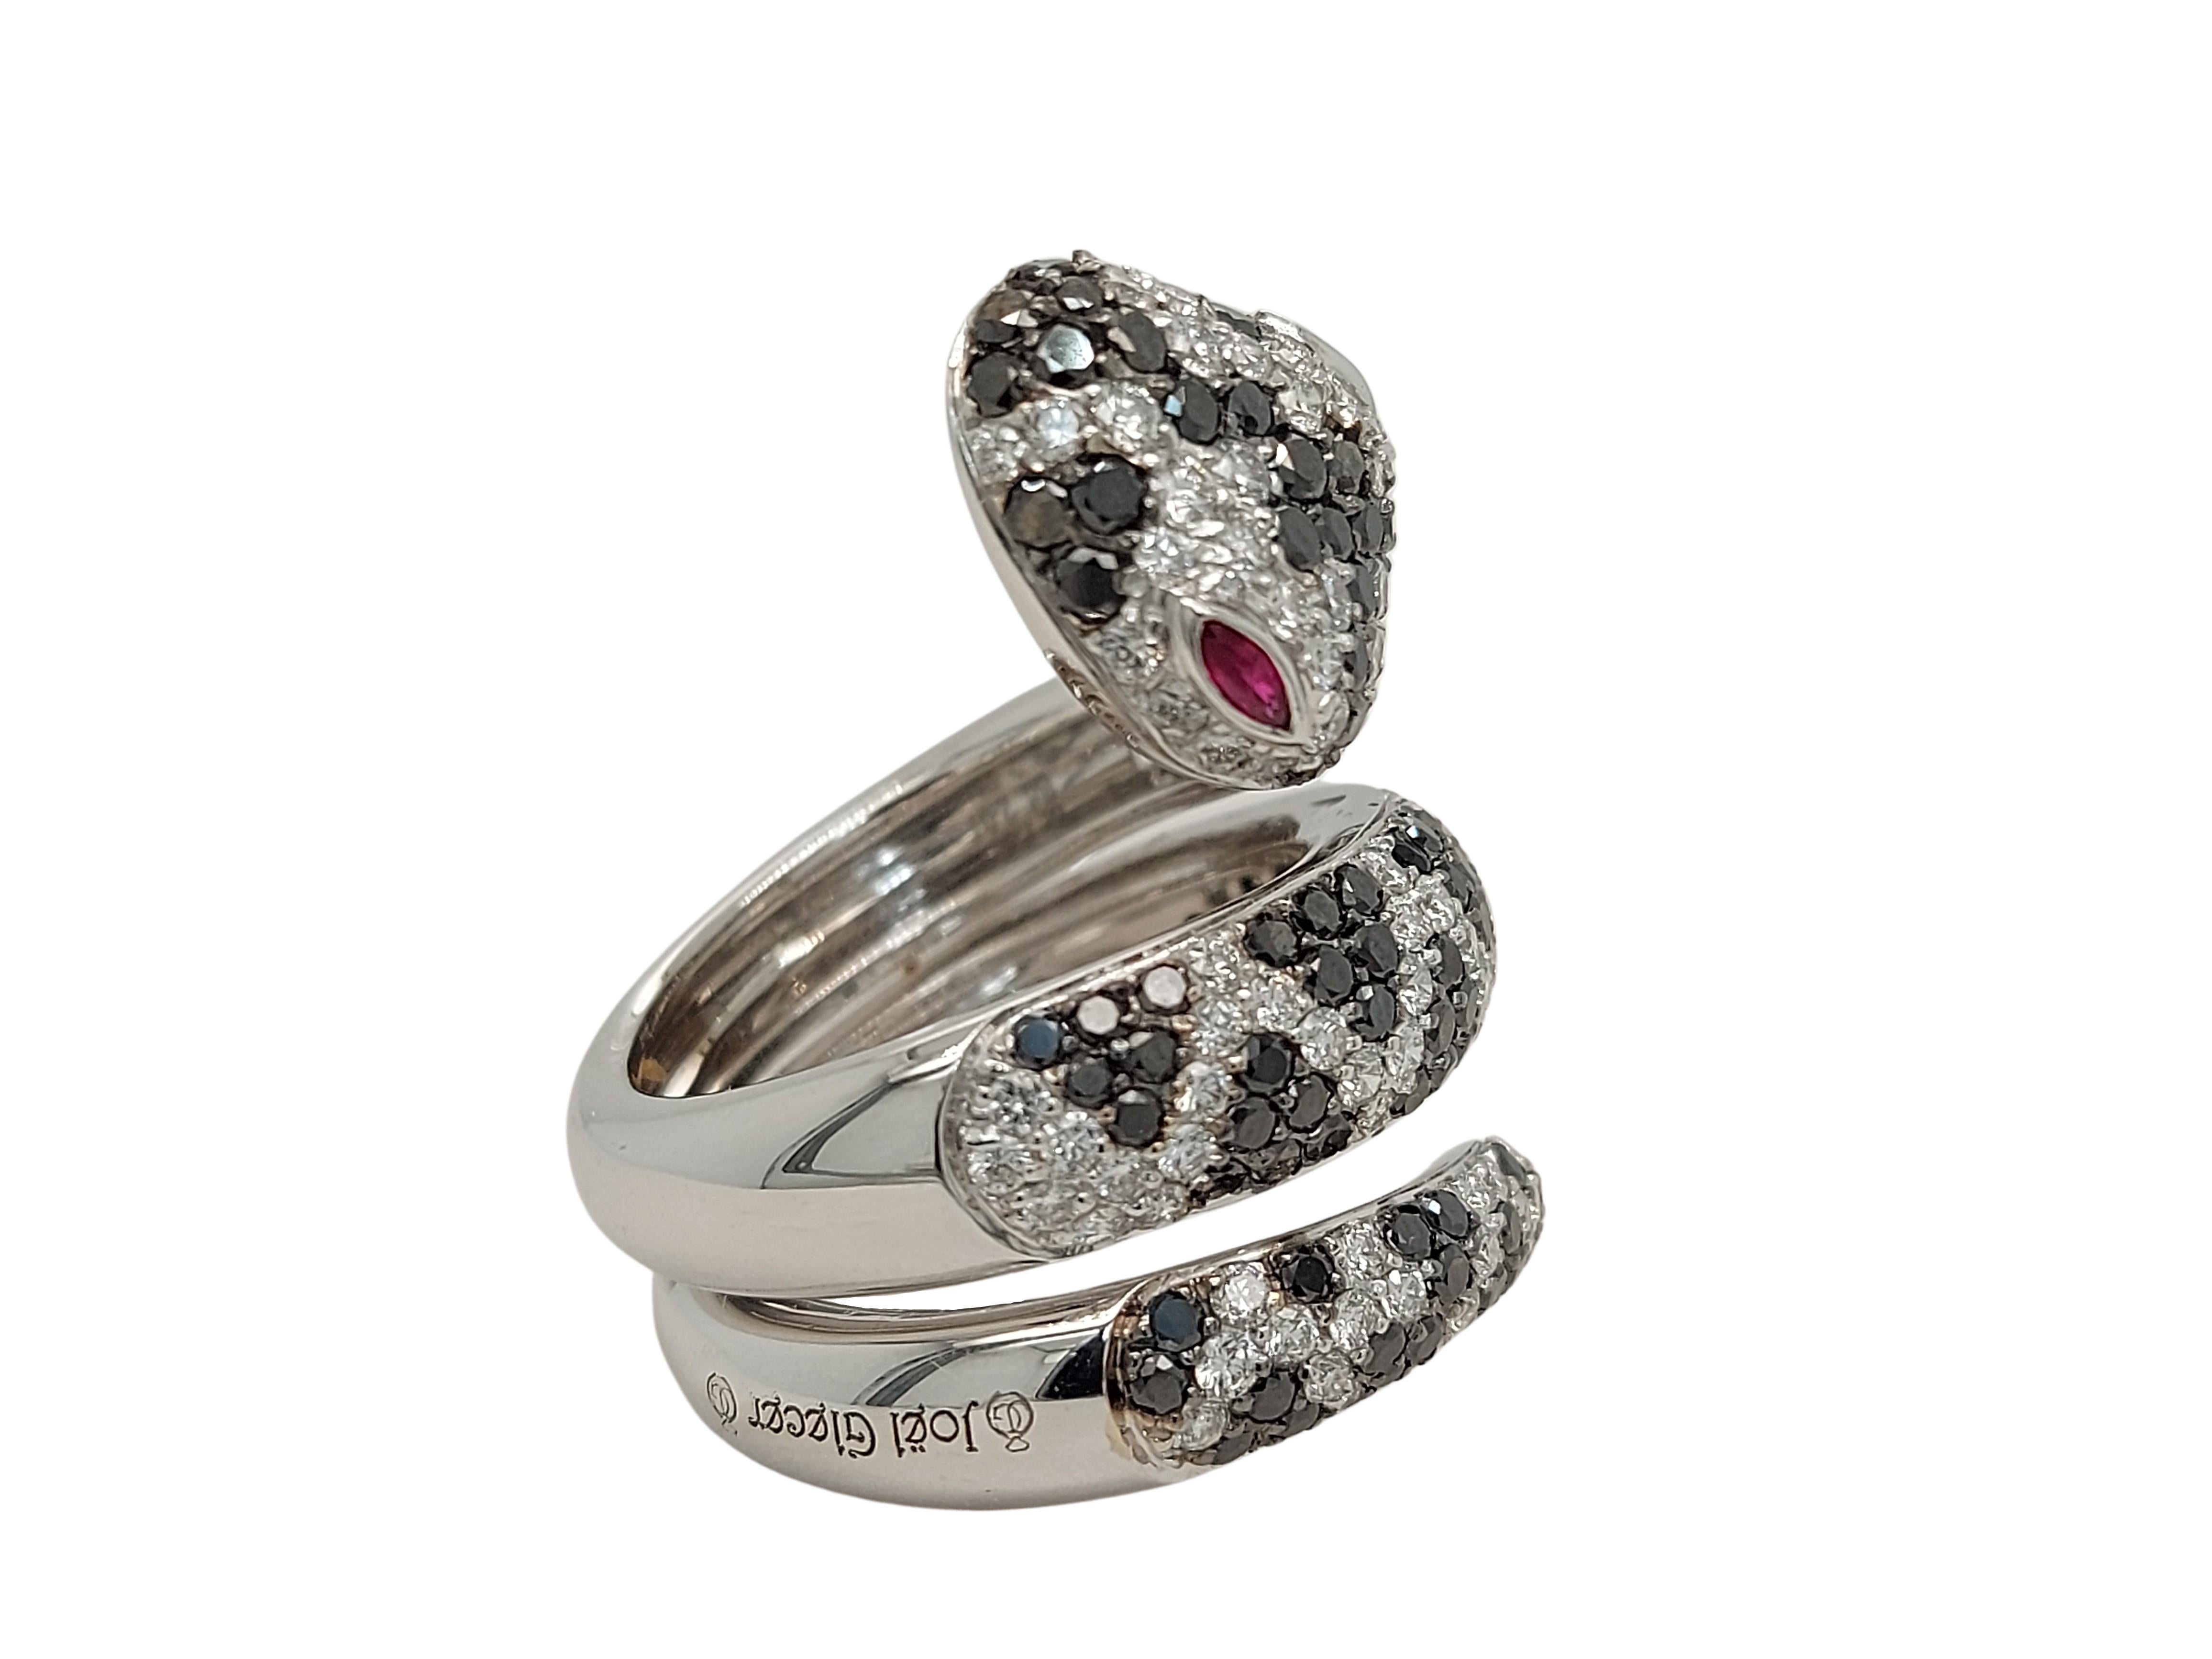 18kt White Gold Snake Ring with 2.04ct Black & 1.75ct White Diamonds & Ruby Eyes For Sale 1